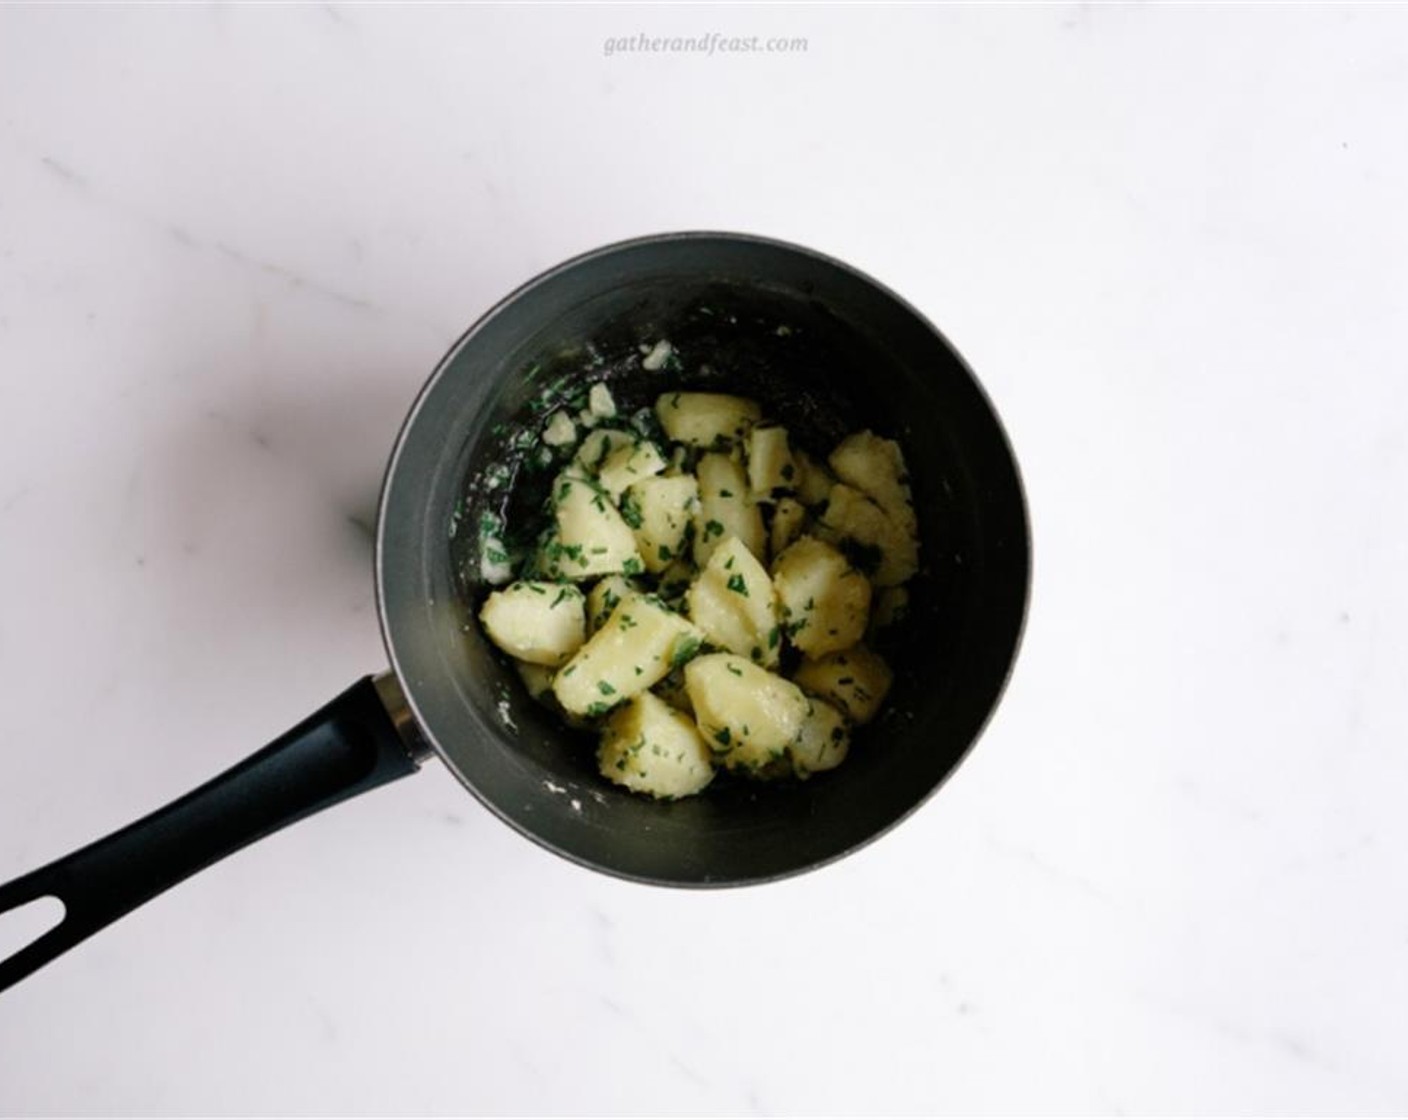 step 2 Add to the cooked potatoes some Sea Salt (to taste), Freshly Ground Black Pepper (to taste), the Fresh Chives (1 bunch) and fresh Fresh Parsley (1 bunch) finely chopped, and toss to combine.